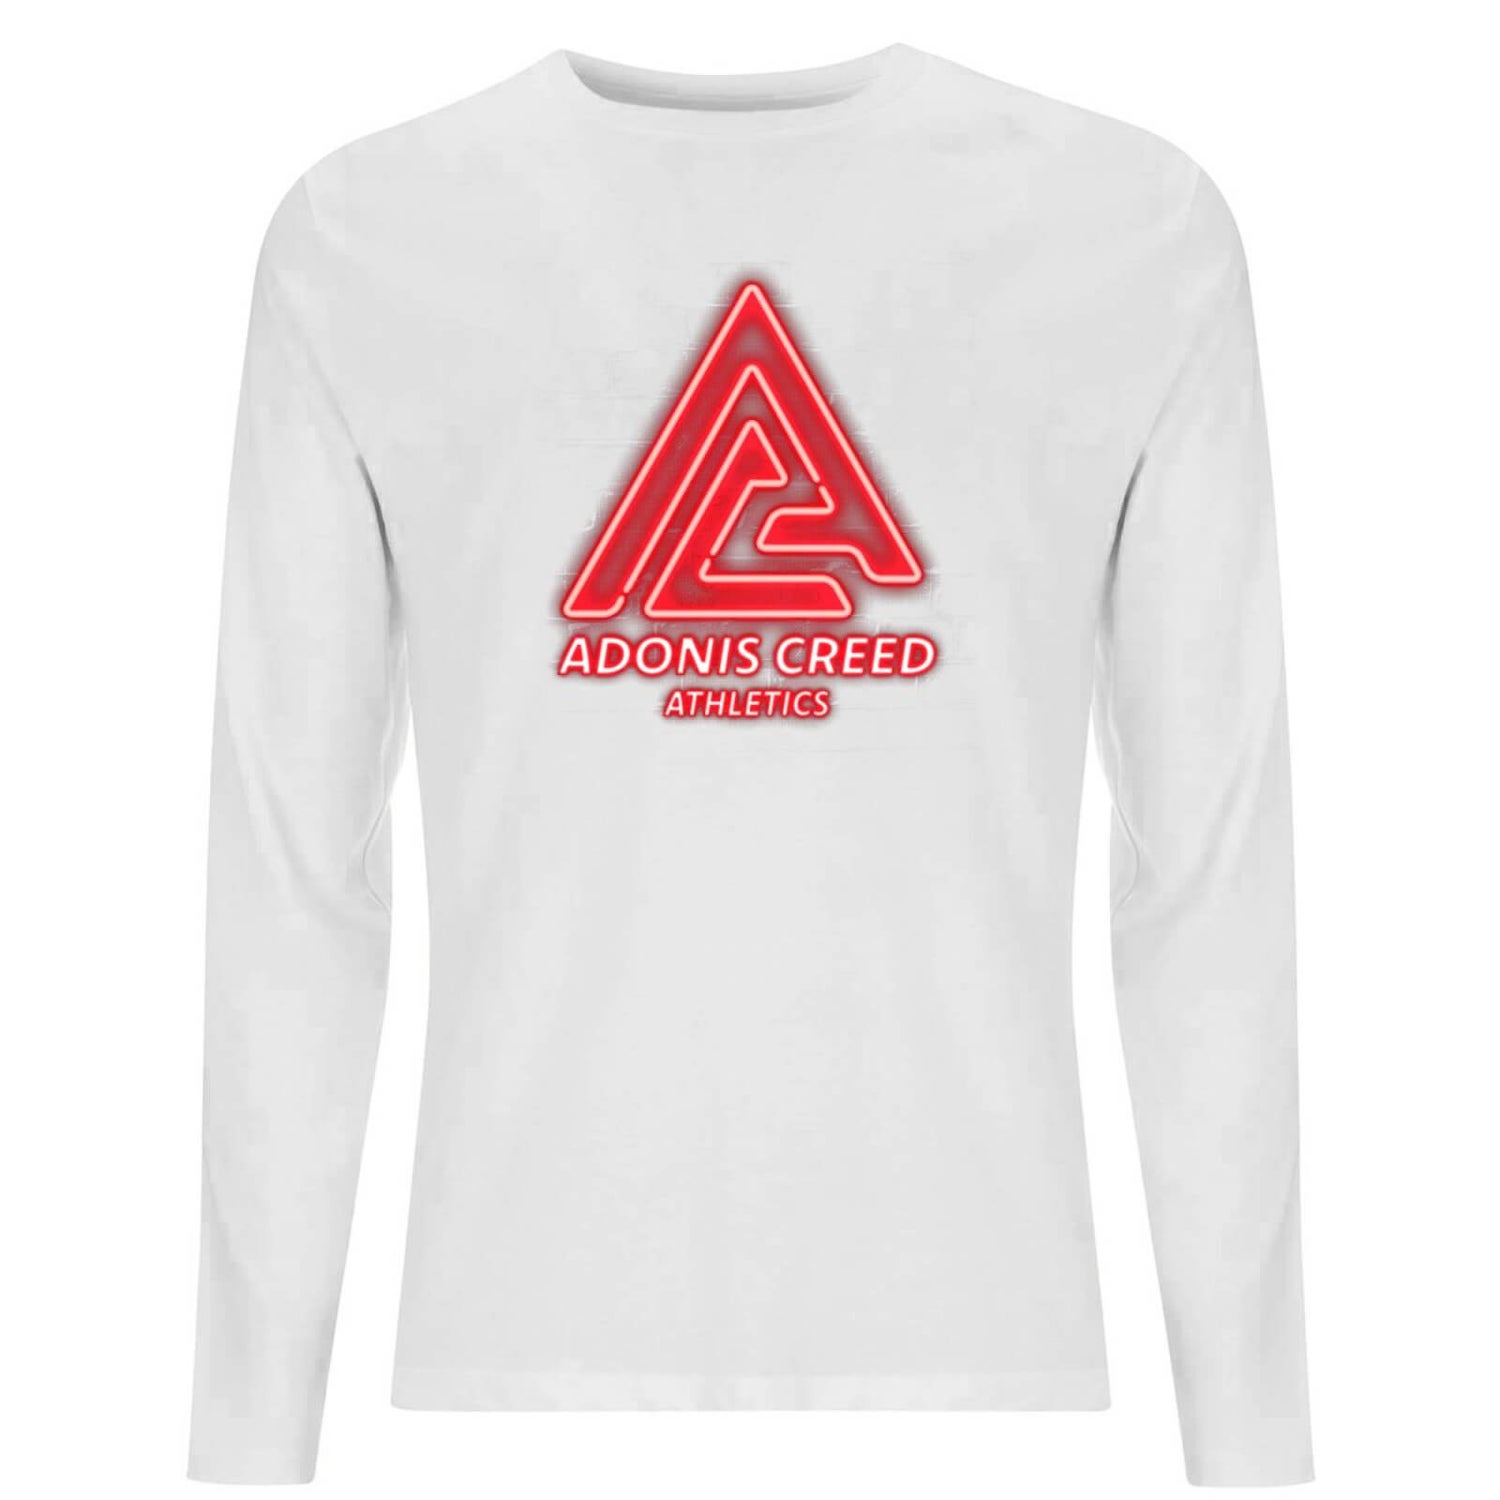 Creed Adonis Creed Athletics Neon Sign Men's Long Sleeve T-Shirt - White - XS